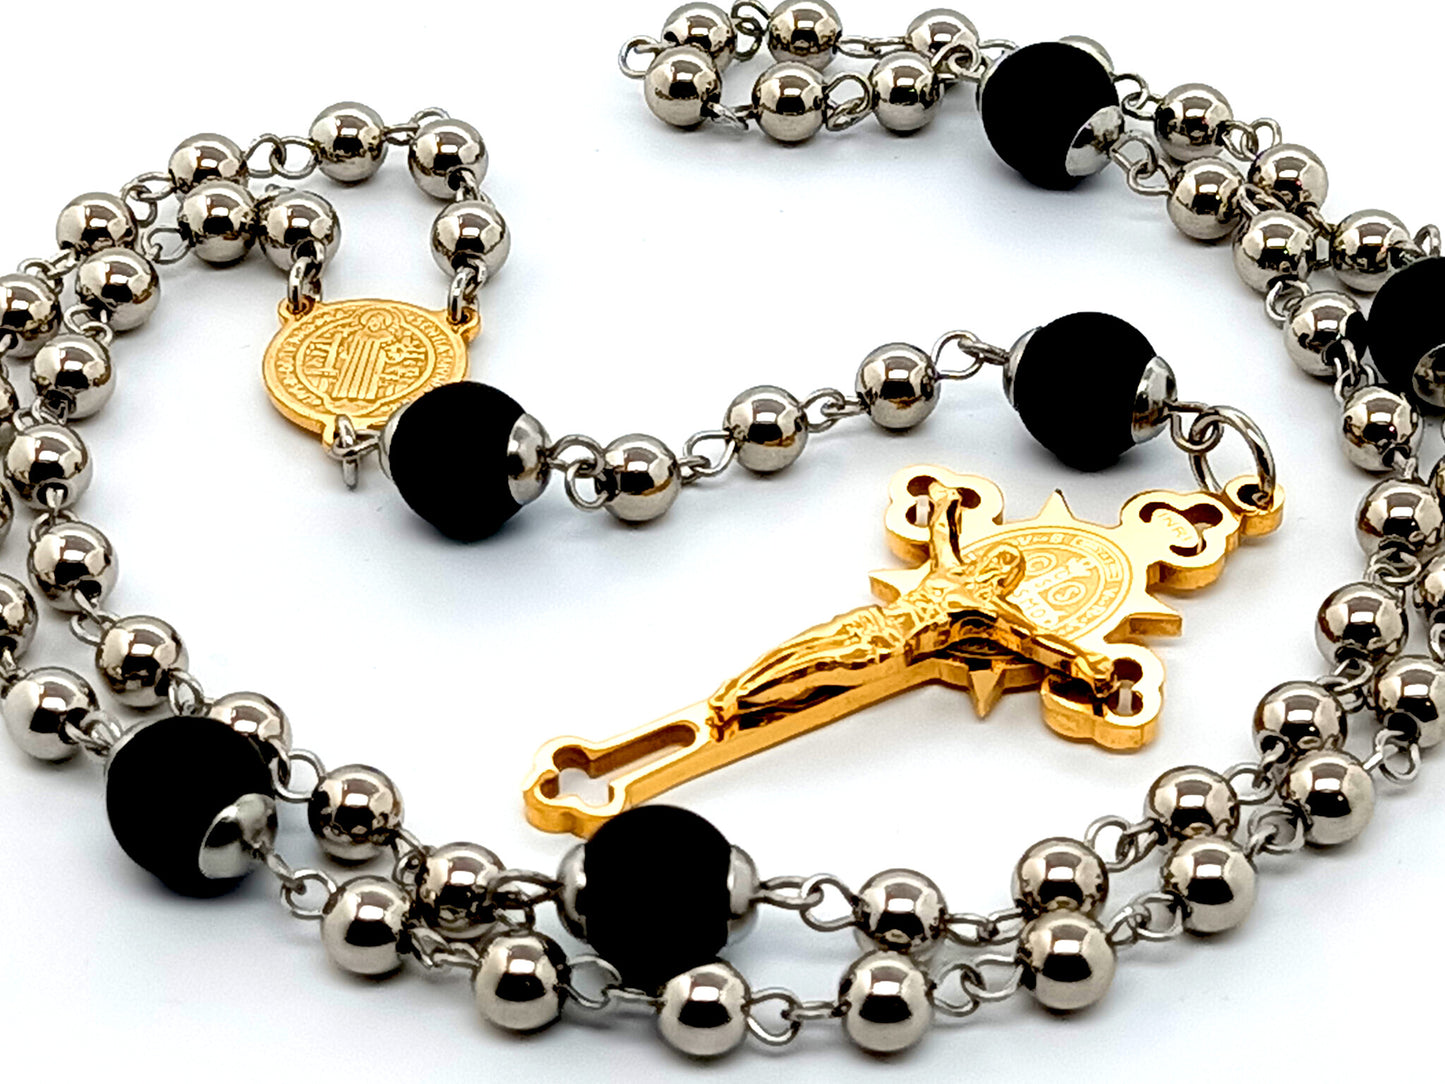 Saint Benedict unique rosary beads with stainless steel and onyx gemstone beads and gold plated stainless steel laser cut crucifix.